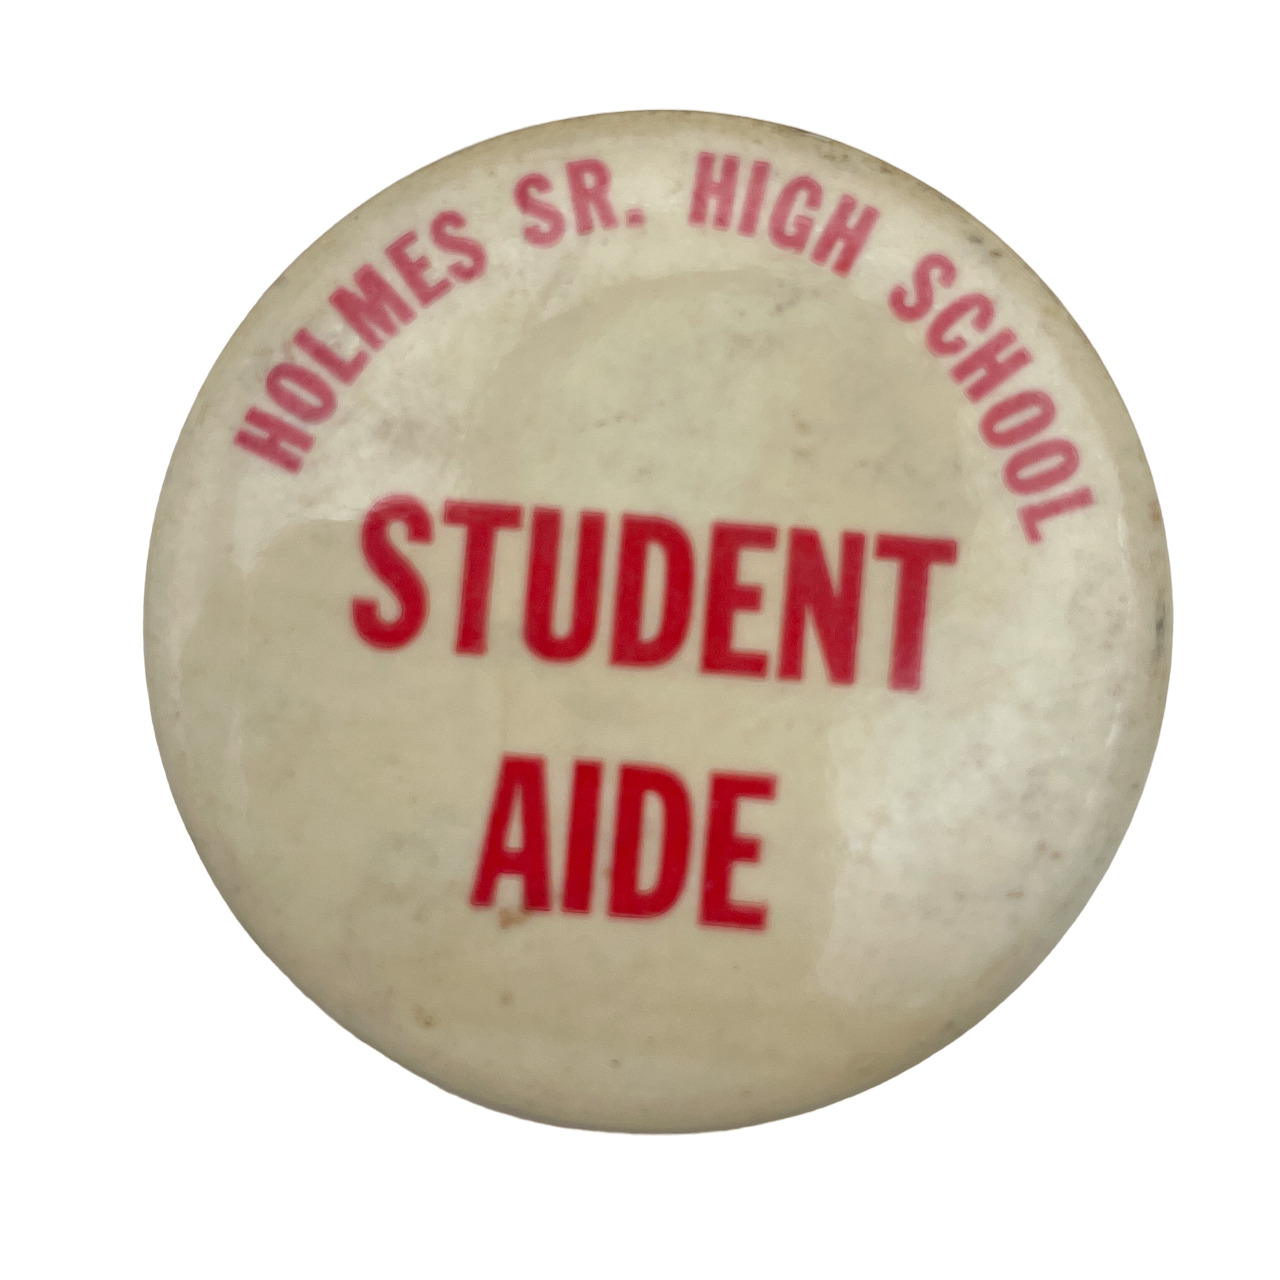 Vintage 80-90s Holmes Sr. High School Student Aide Pinback Pin Button